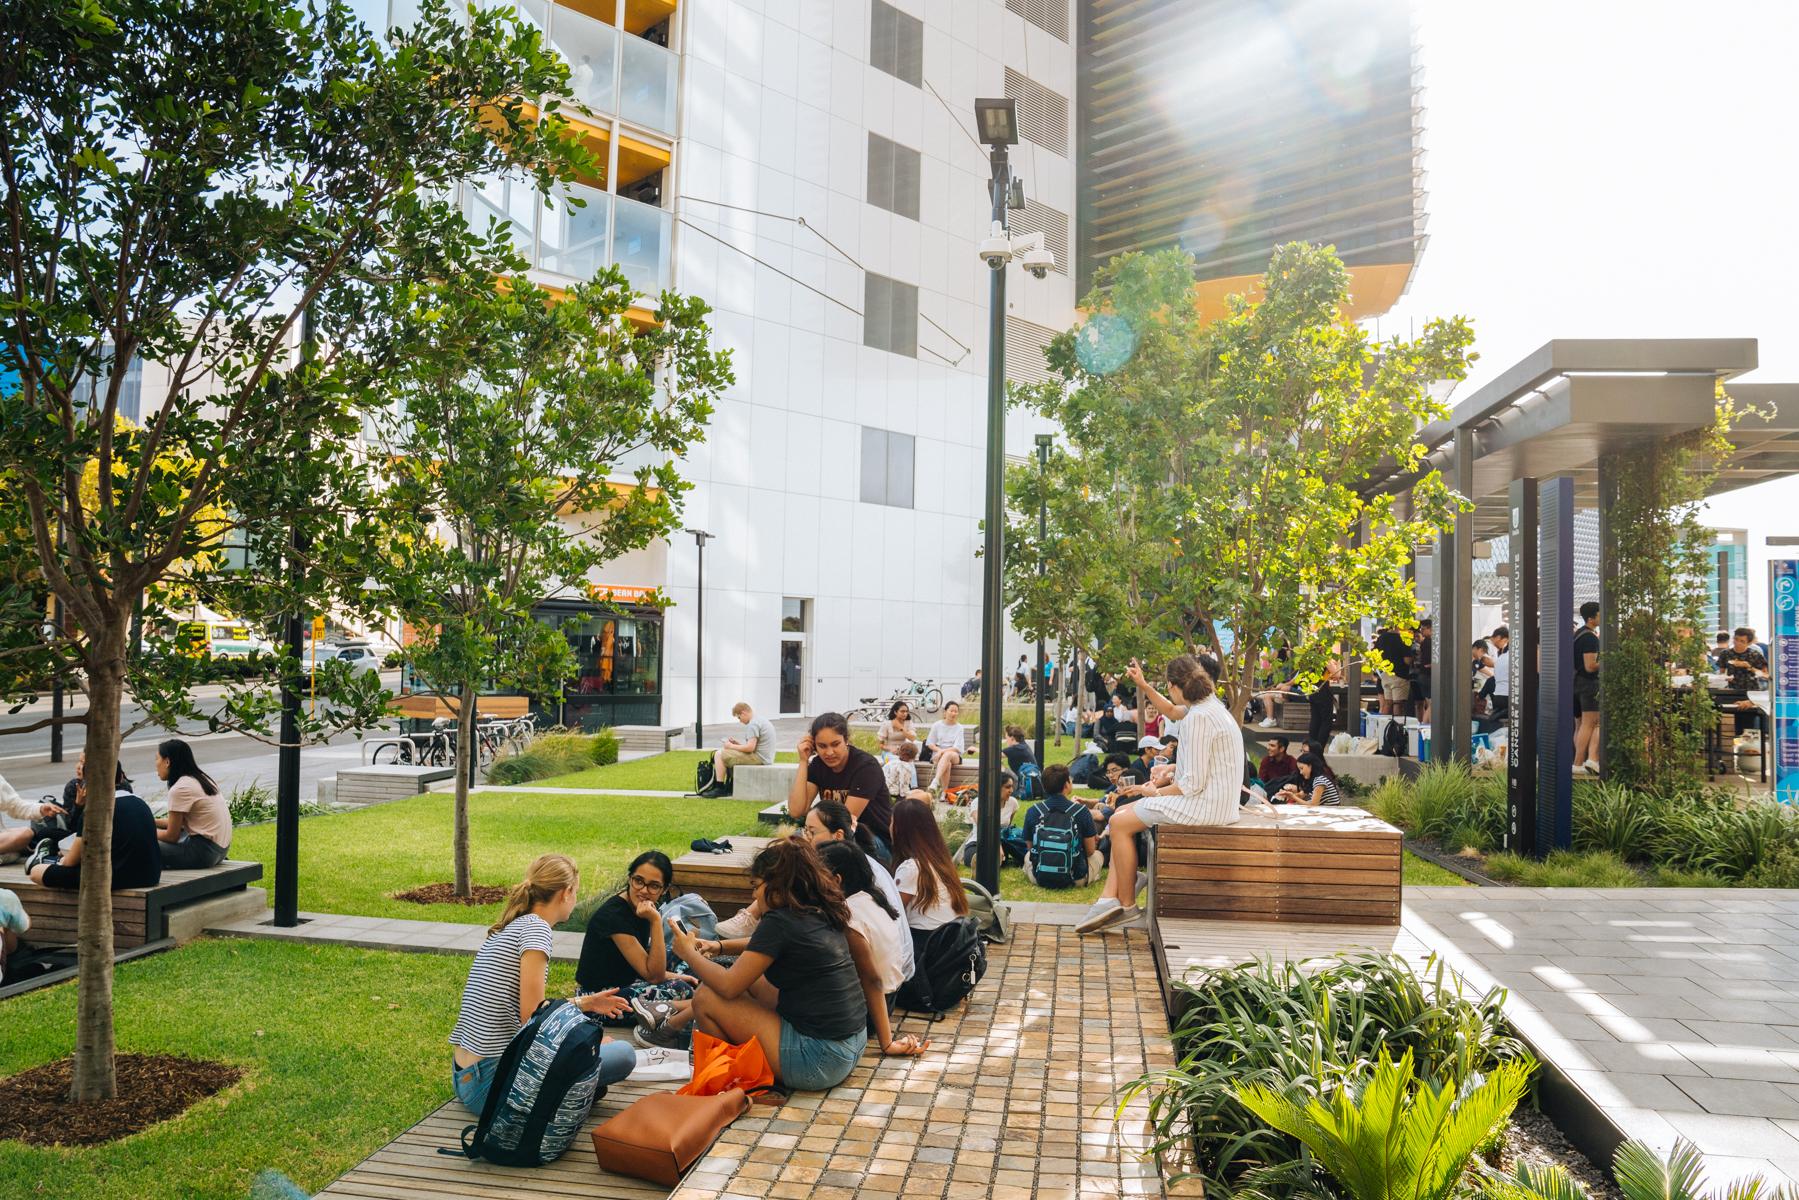 Students sitting and chatting in the Urban Park, outside the AHMS building